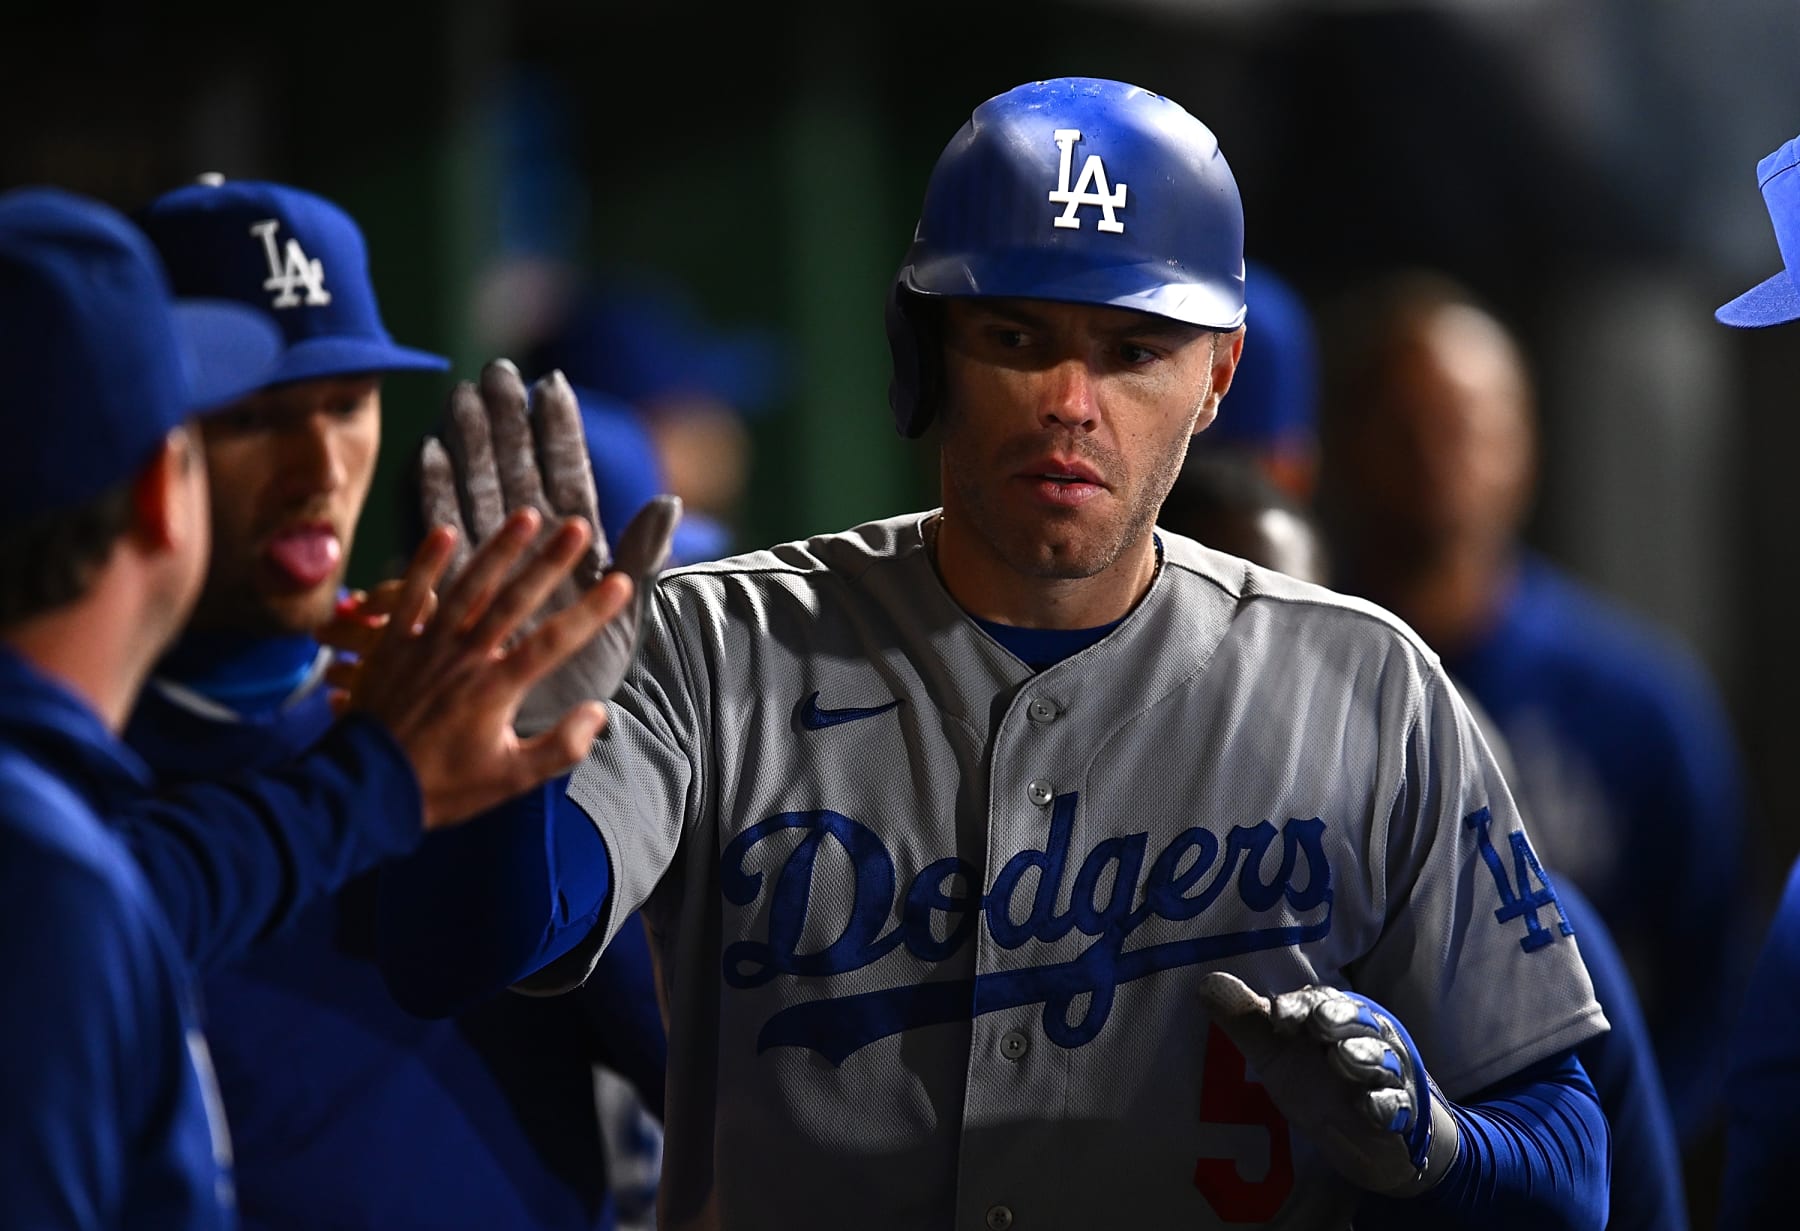 April 5, 2022, Los Angeles, California, USA: Freddie Freeman #5 of the Los  Angeles Dodgers runs to home base during their Spring Training game against  the Los Angeles Angels on Tuesday April